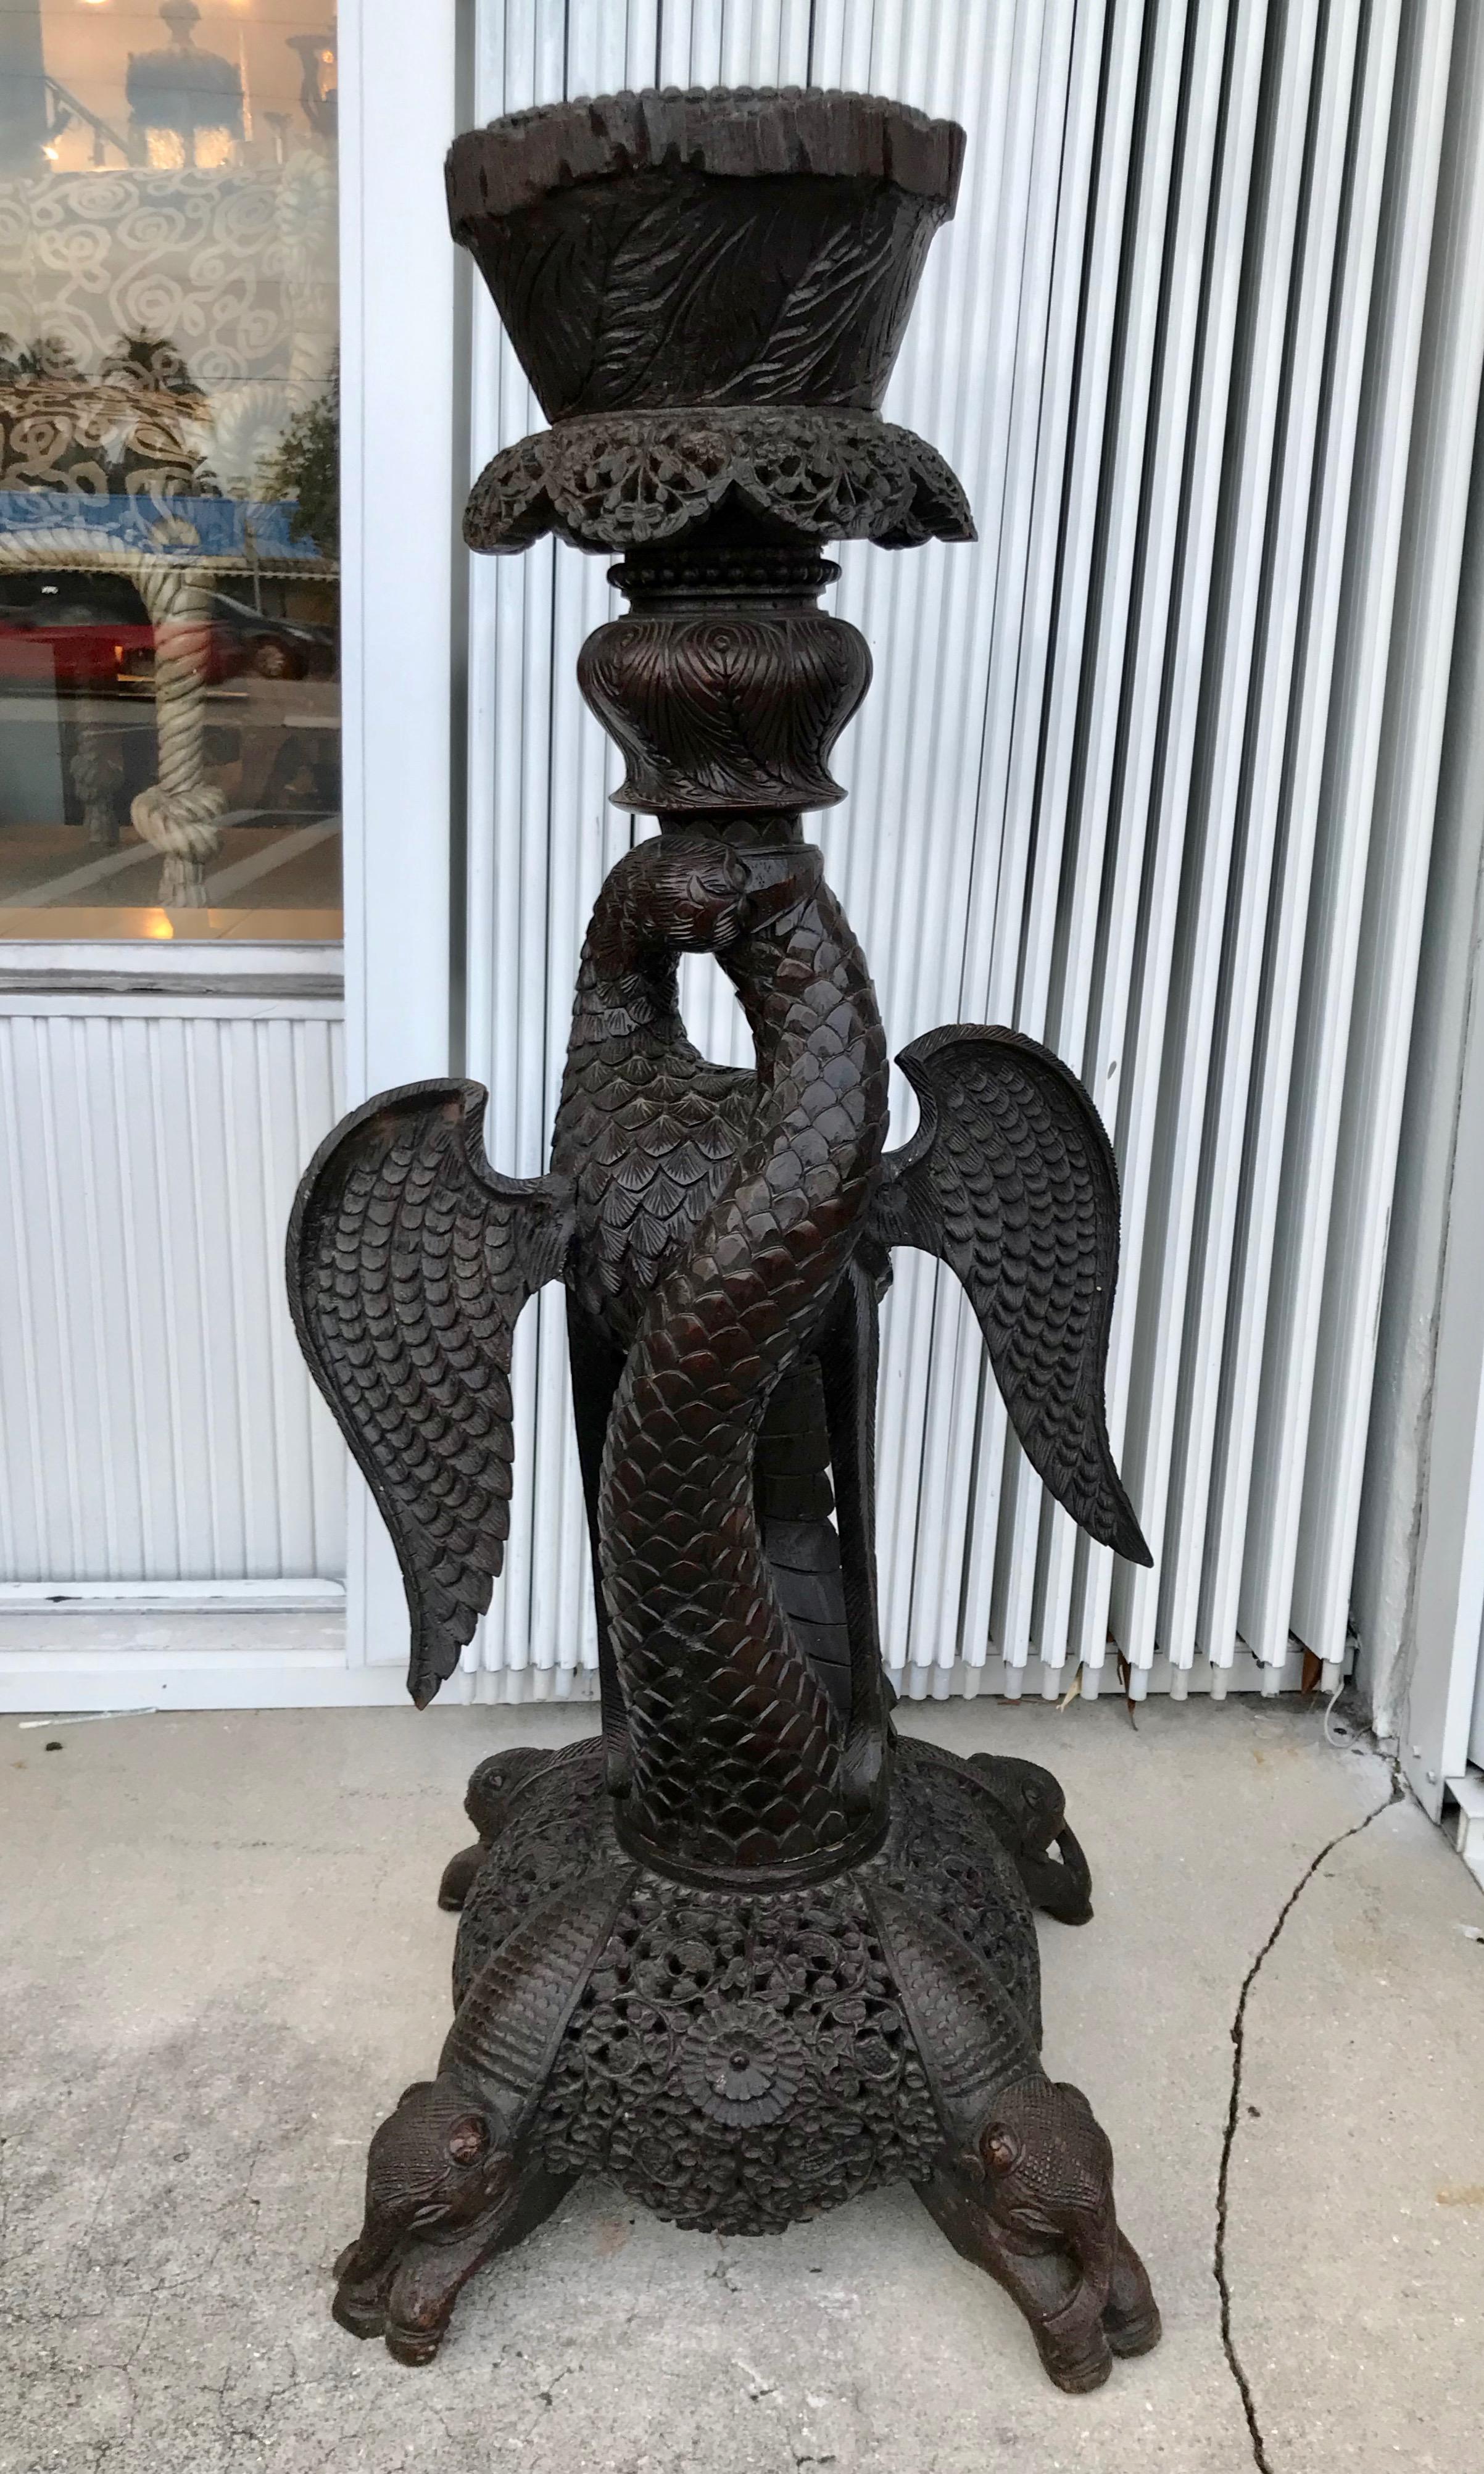 The piece is elaborately carved featuring an eagle with a snake in its mouth.
It is raised upon a base that terminates with 4 elephant motif feet.
Fabulous hardwood carving.